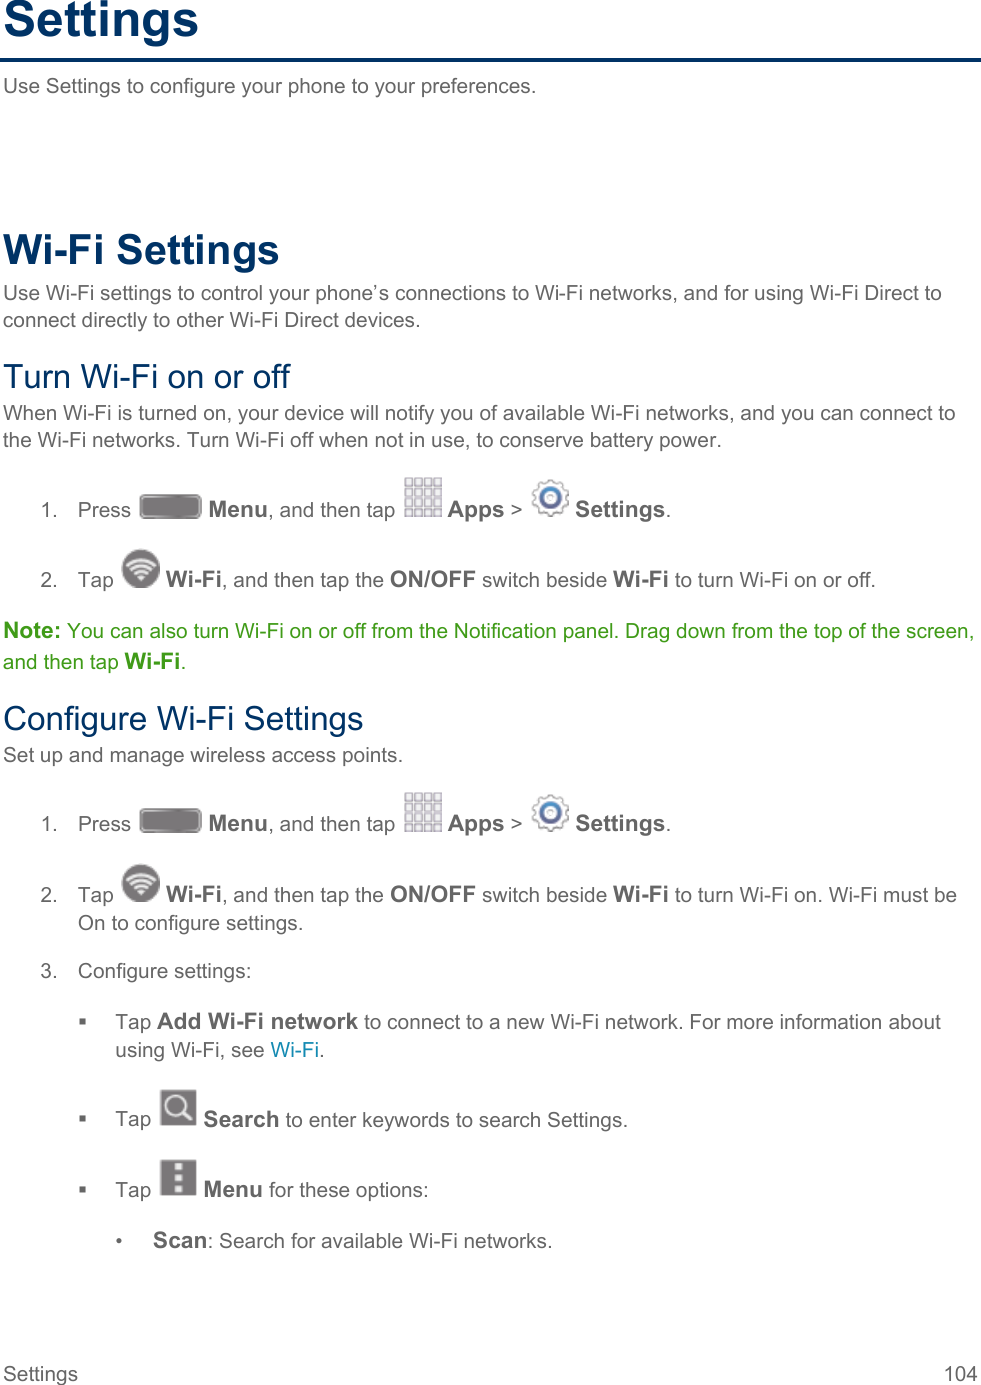  Settings Use Settings to configure your phone to your preferences.        Wi-Fi Settings Use Wi-Fi settings to control your phone’s connections to Wi-Fi networks, and for using Wi-Fi Direct to connect directly to other Wi-Fi Direct devices. Turn Wi-Fi on or off When Wi-Fi is turned on, your device will notify you of available Wi-Fi networks, and you can connect to the Wi-Fi networks. Turn Wi-Fi off when not in use, to conserve battery power. 1. Press   Menu, and then tap   Apps &gt;   Settings.  2. Tap   Wi-Fi, and then tap the ON/OFF switch beside Wi-Fi to turn Wi-Fi on or off. Note: You can also turn Wi-Fi on or off from the Notification panel. Drag down from the top of the screen, and then tap Wi-Fi. Configure Wi-Fi Settings Set up and manage wireless access points. 1. Press   Menu, and then tap   Apps &gt;   Settings.  2. Tap   Wi-Fi, and then tap the ON/OFF switch beside Wi-Fi to turn Wi-Fi on. Wi-Fi must be On to configure settings. 3. Configure settings:  Tap Add Wi-Fi network to connect to a new Wi-Fi network. For more information about using Wi-Fi, see Wi-Fi.  Tap   Search to enter keywords to search Settings.  Tap   Menu for these options: •  Scan: Search for available Wi-Fi networks. Settings 104   